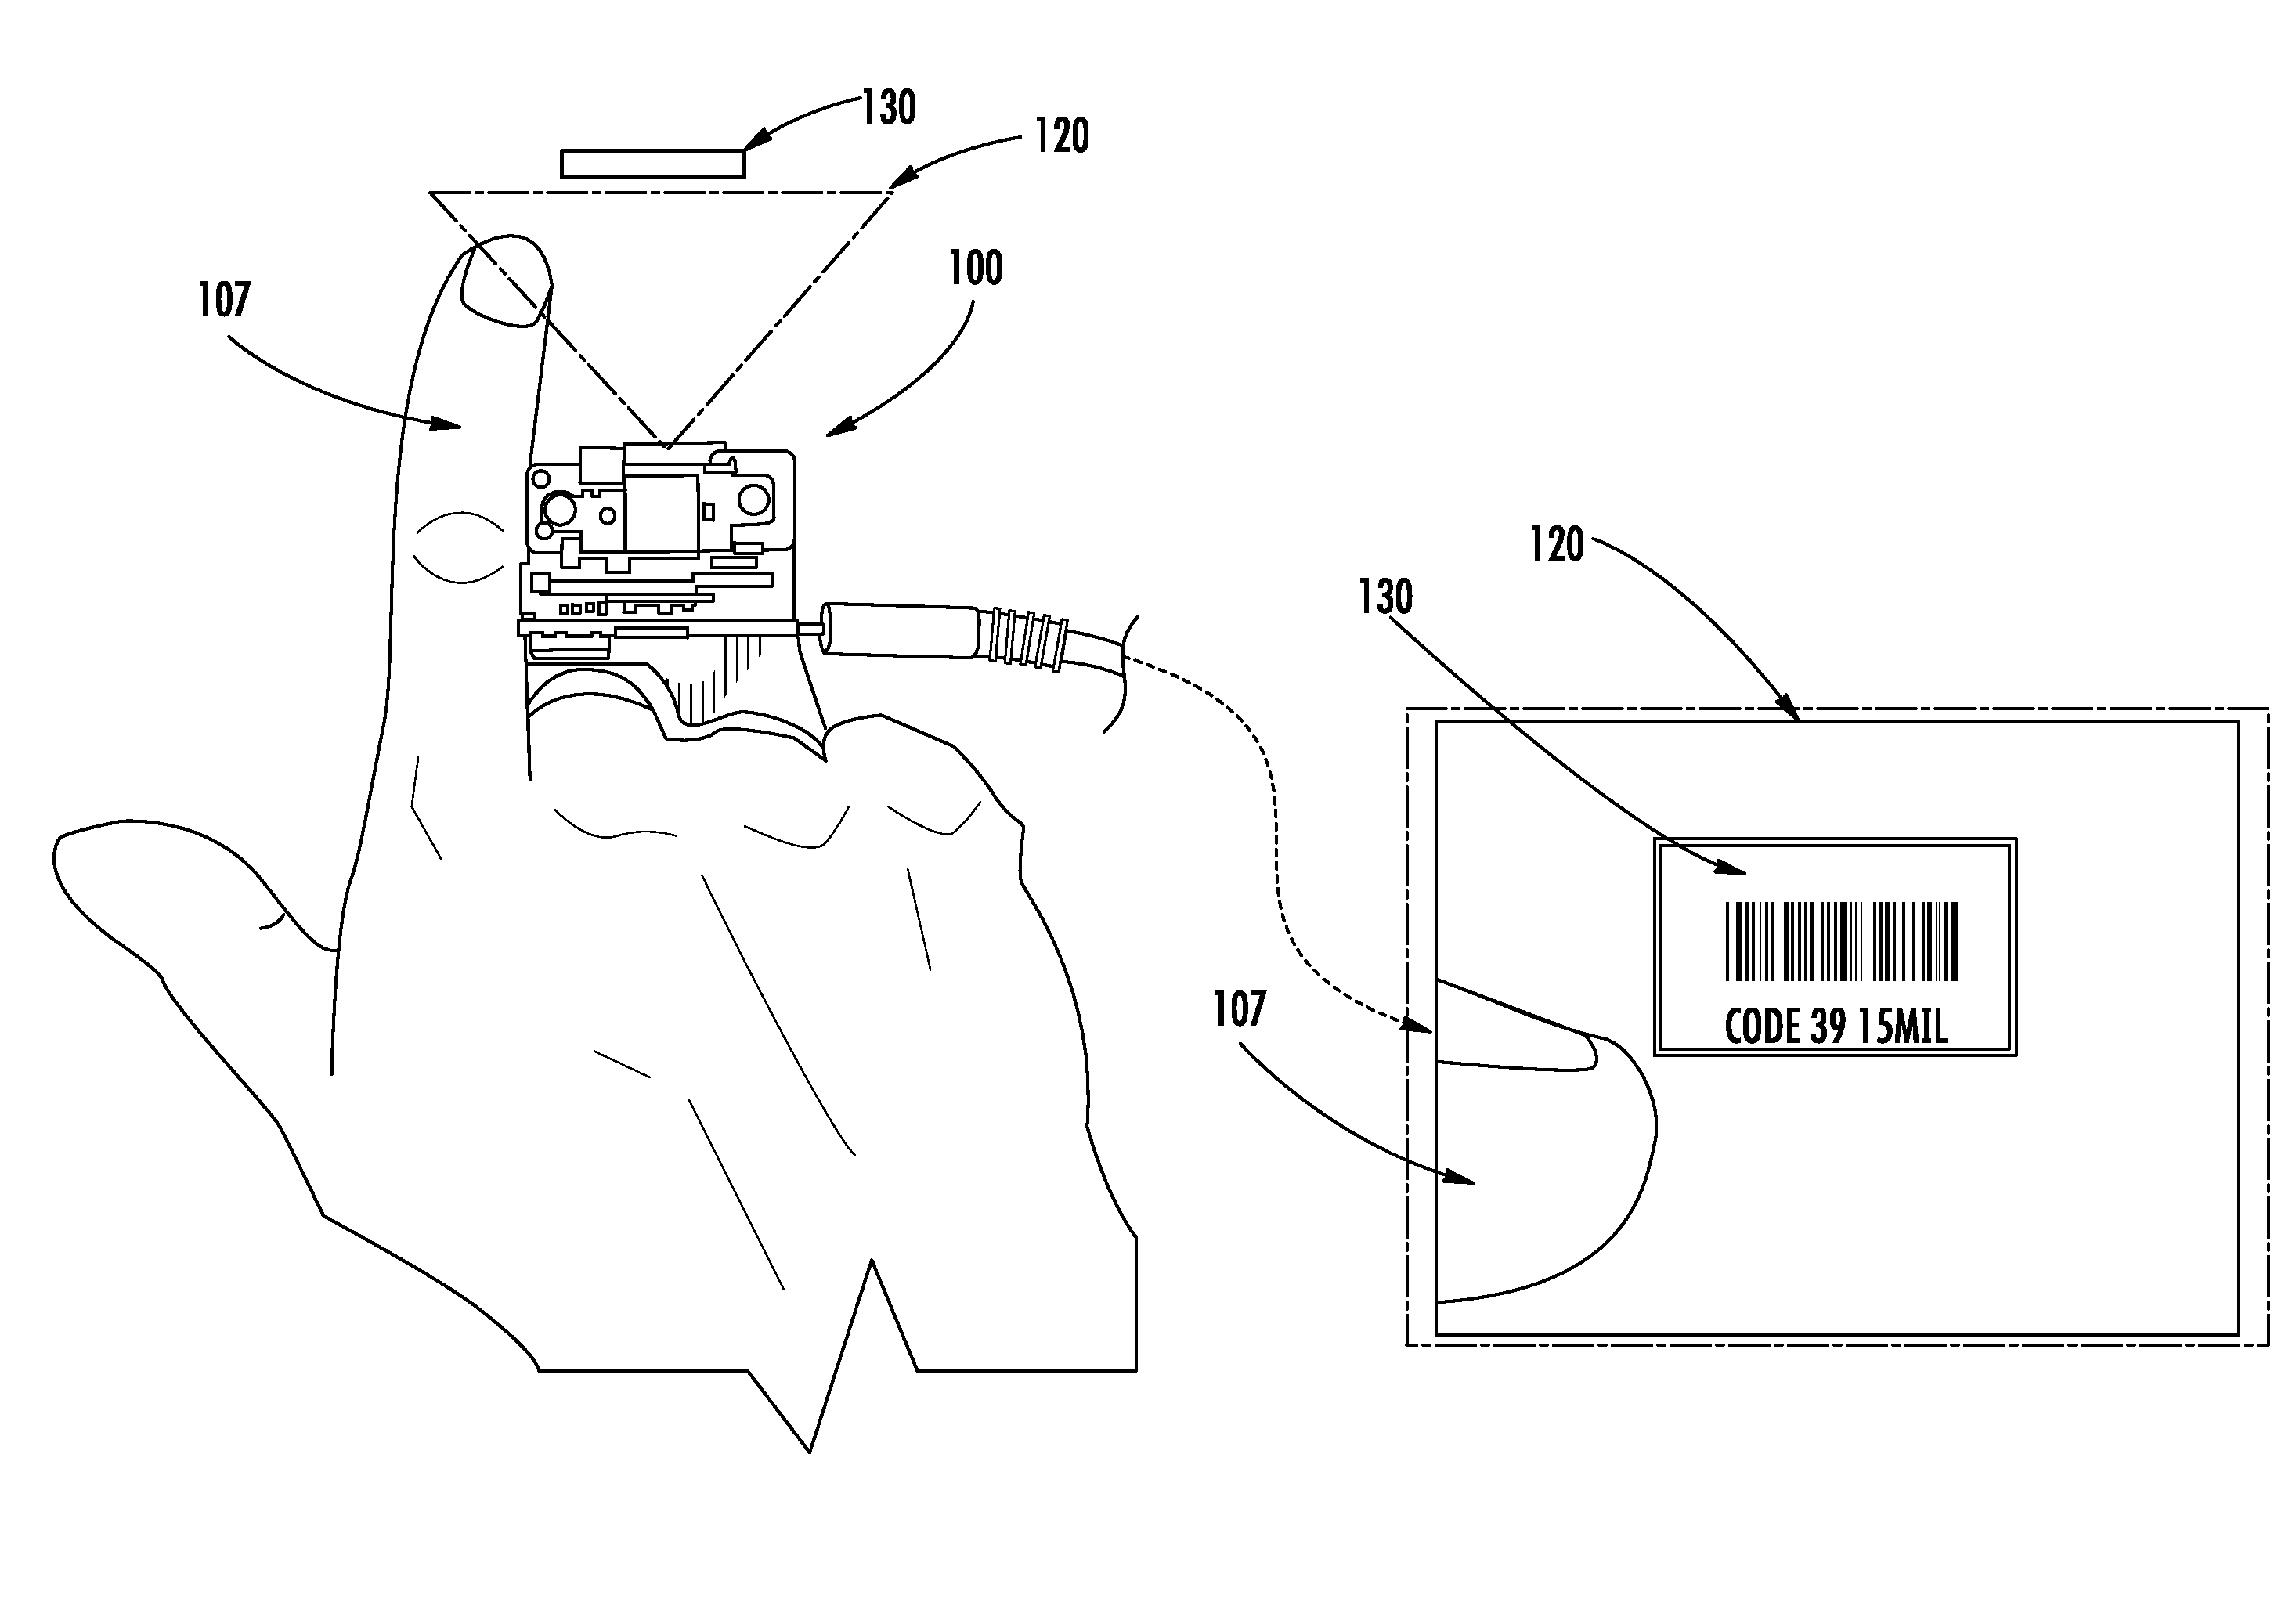 Hand-mounted indicia-reading device with finger motion triggering